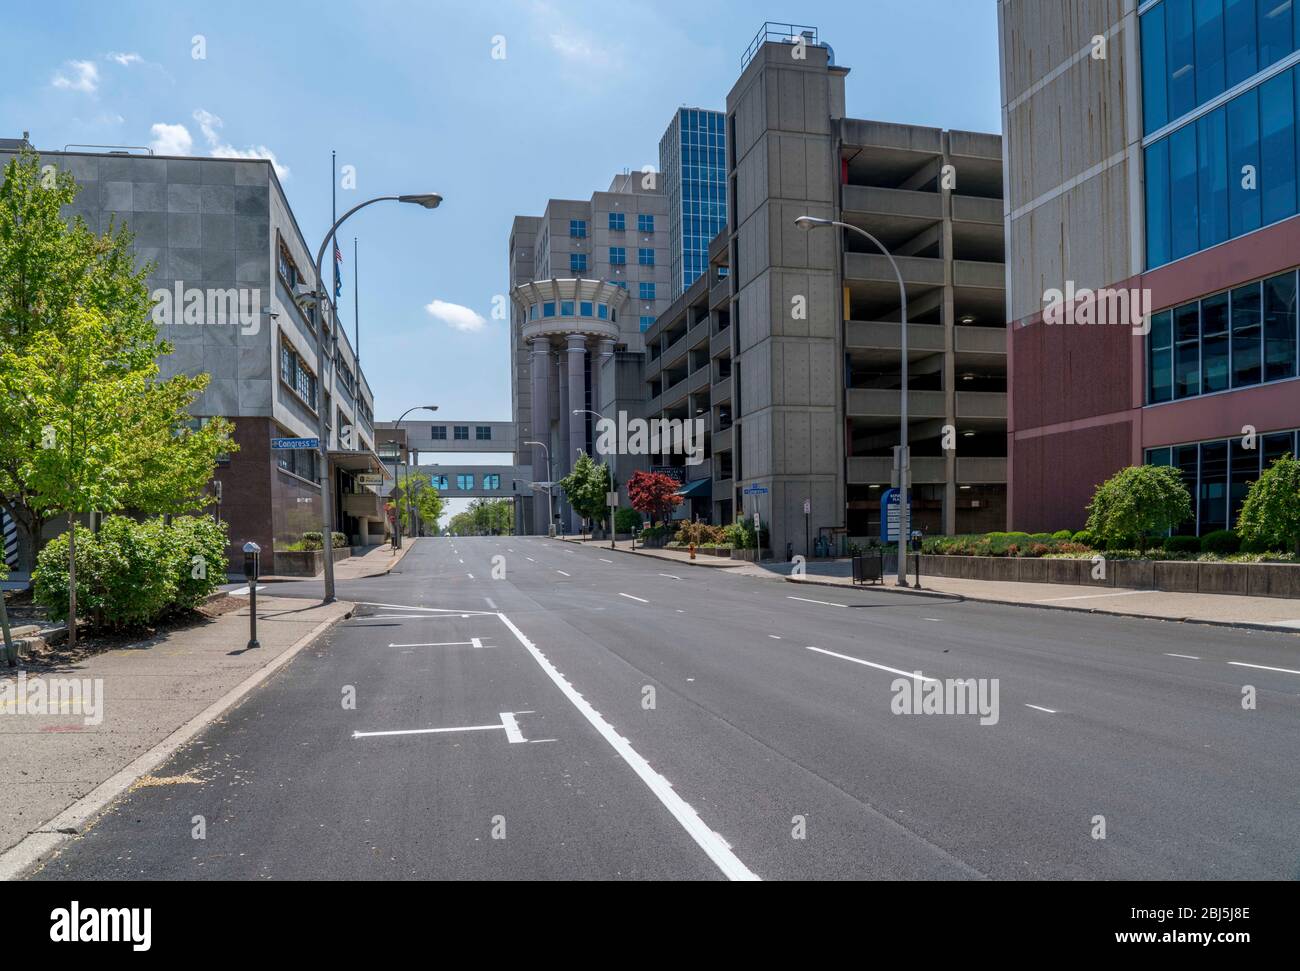 Courthouse and Jail street view during the Novel Virus COVID-19 and Kentucky Governor Andy Beshear's lockdown order empties downtown pictured on April 17, 2020 in Louisville, Kentucky. Stock Photo